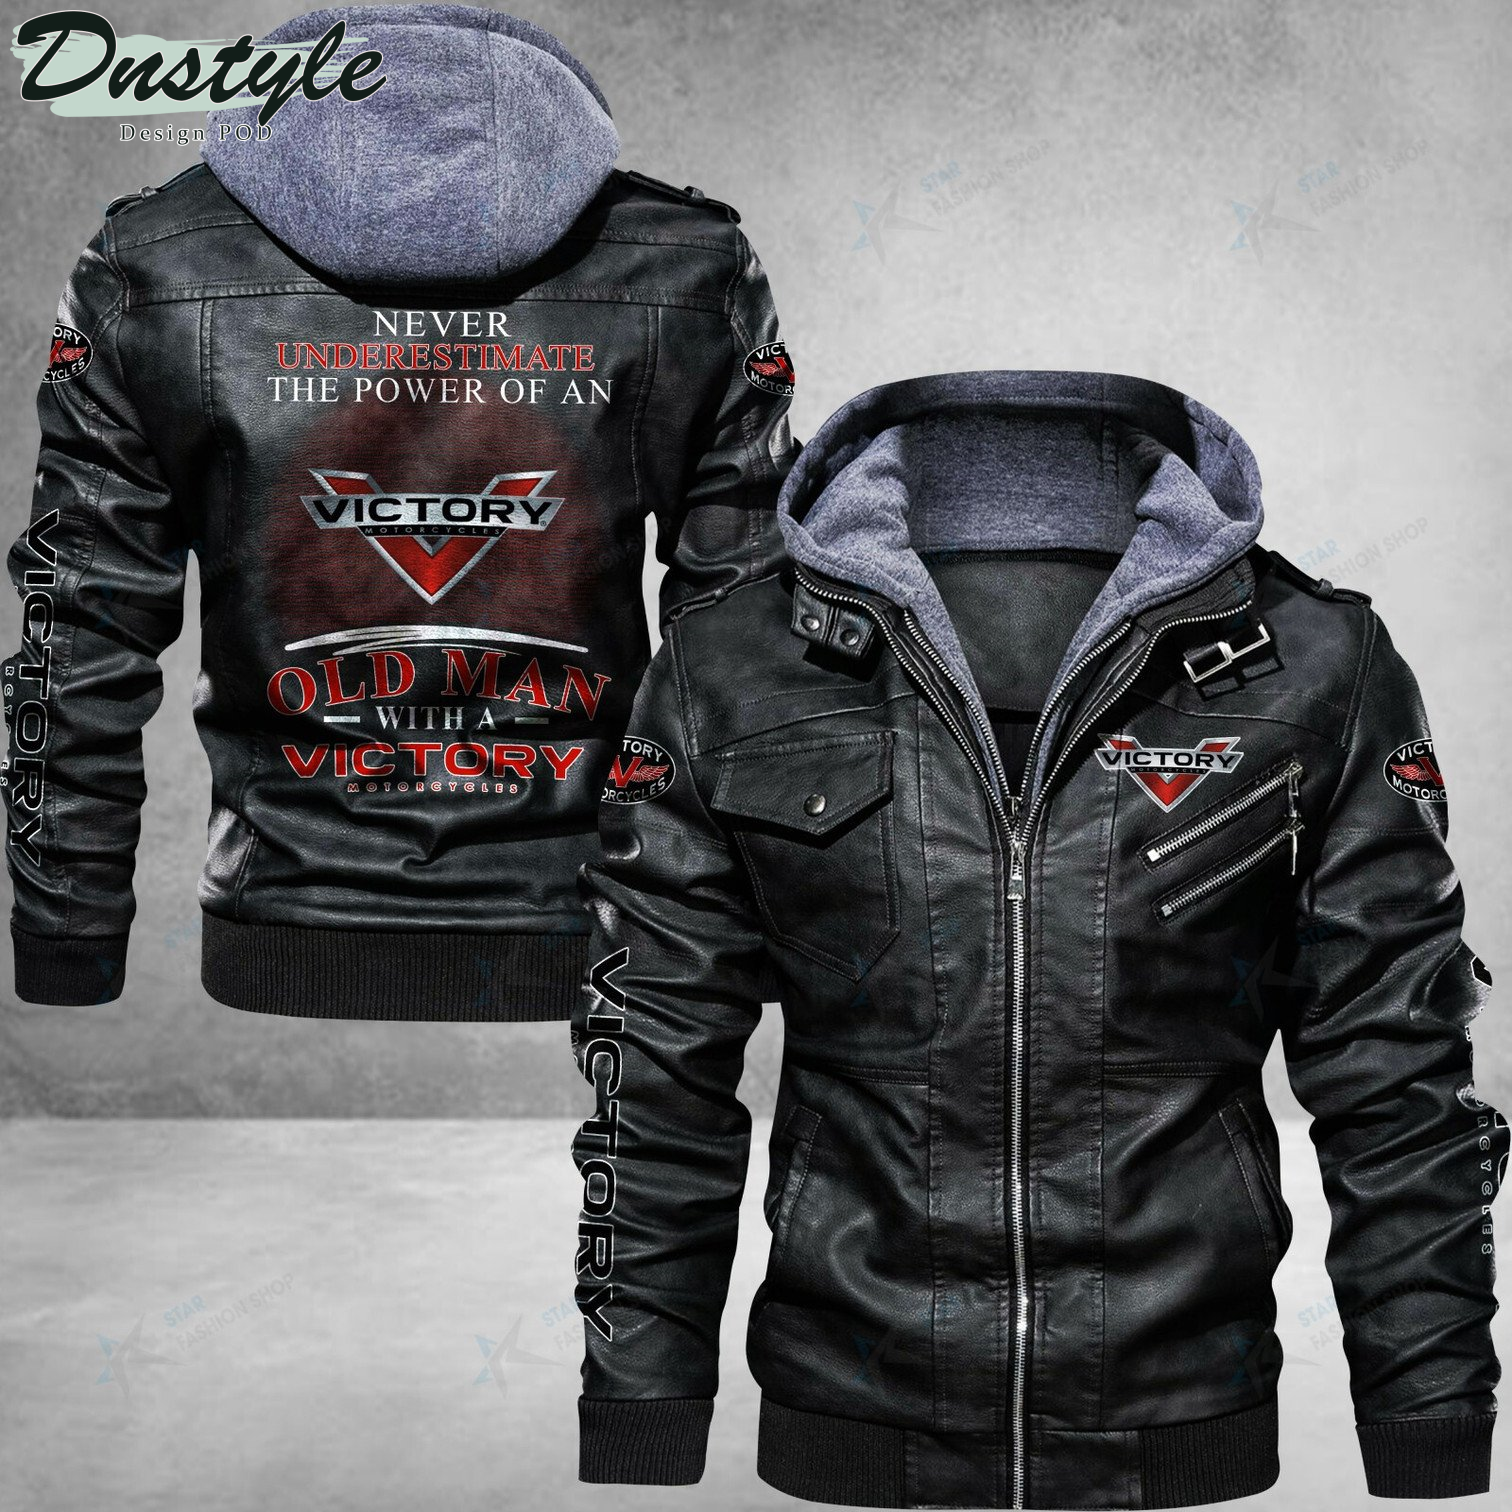 Victory Motorcycles never underestimate the power of an old man leather jacket